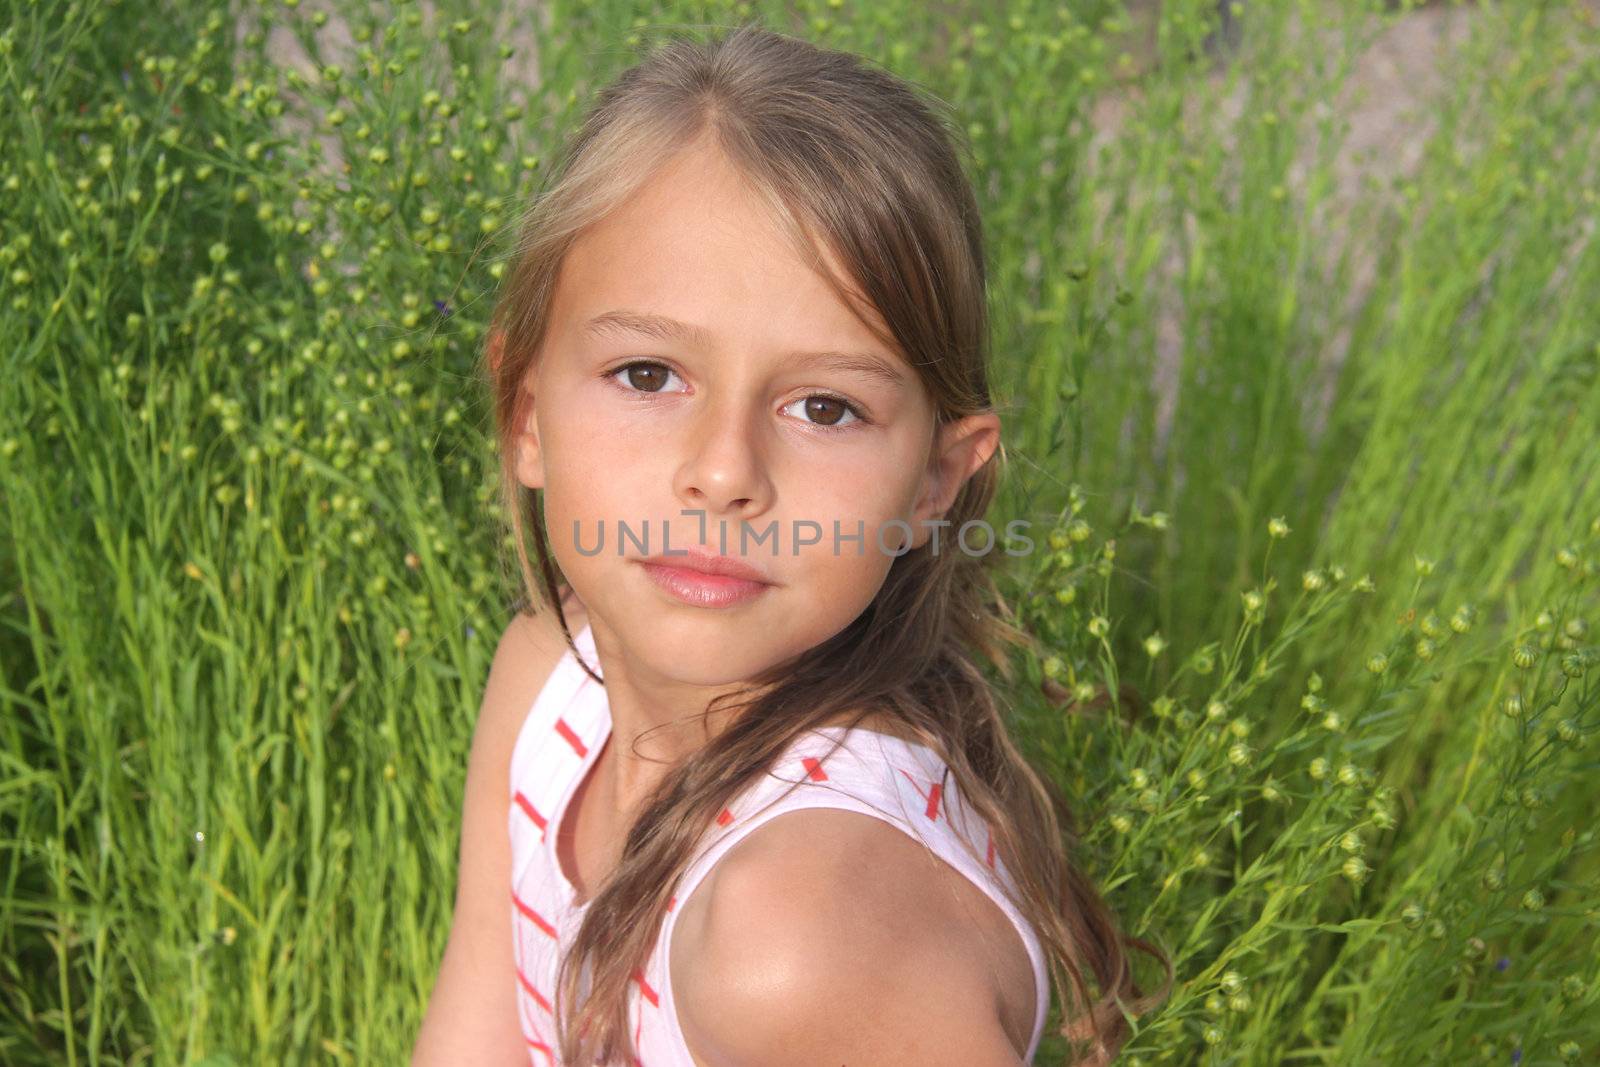 A 10 year old girl looking at the camera